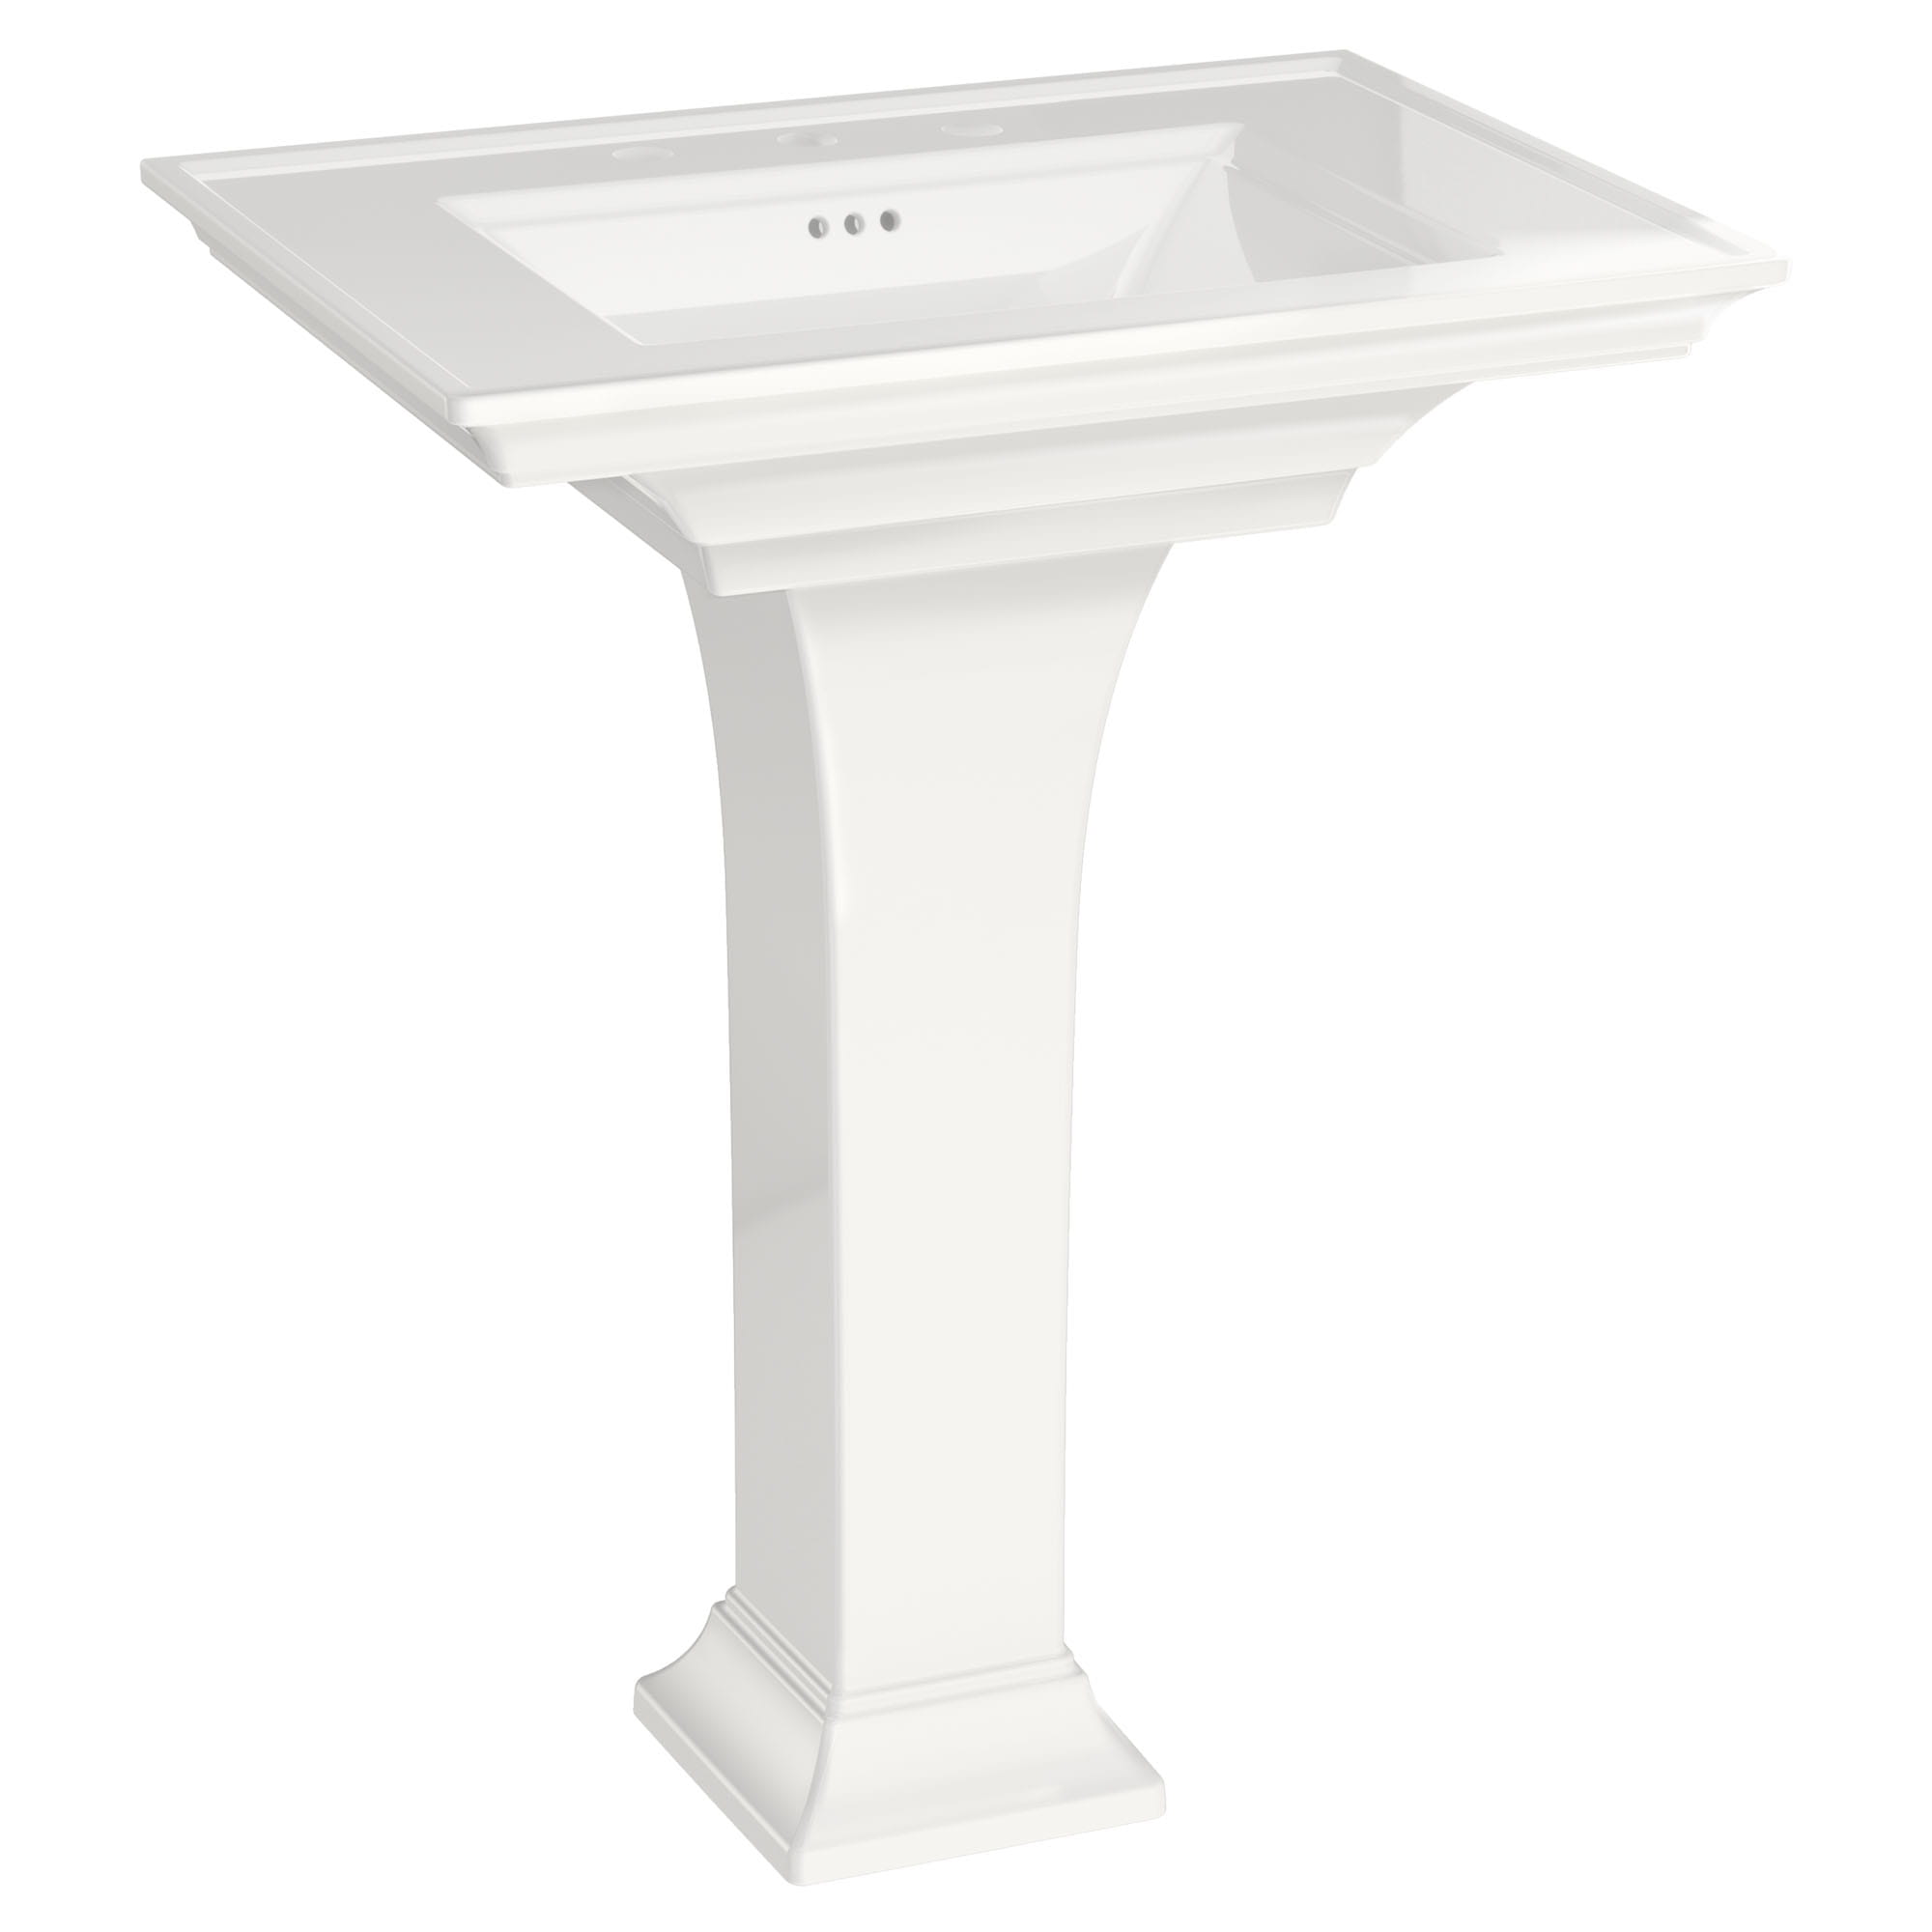 American Standard 0283.008.020 Standard Collection Pedestal Sink Top with 8-Inch Faucet Spacing White